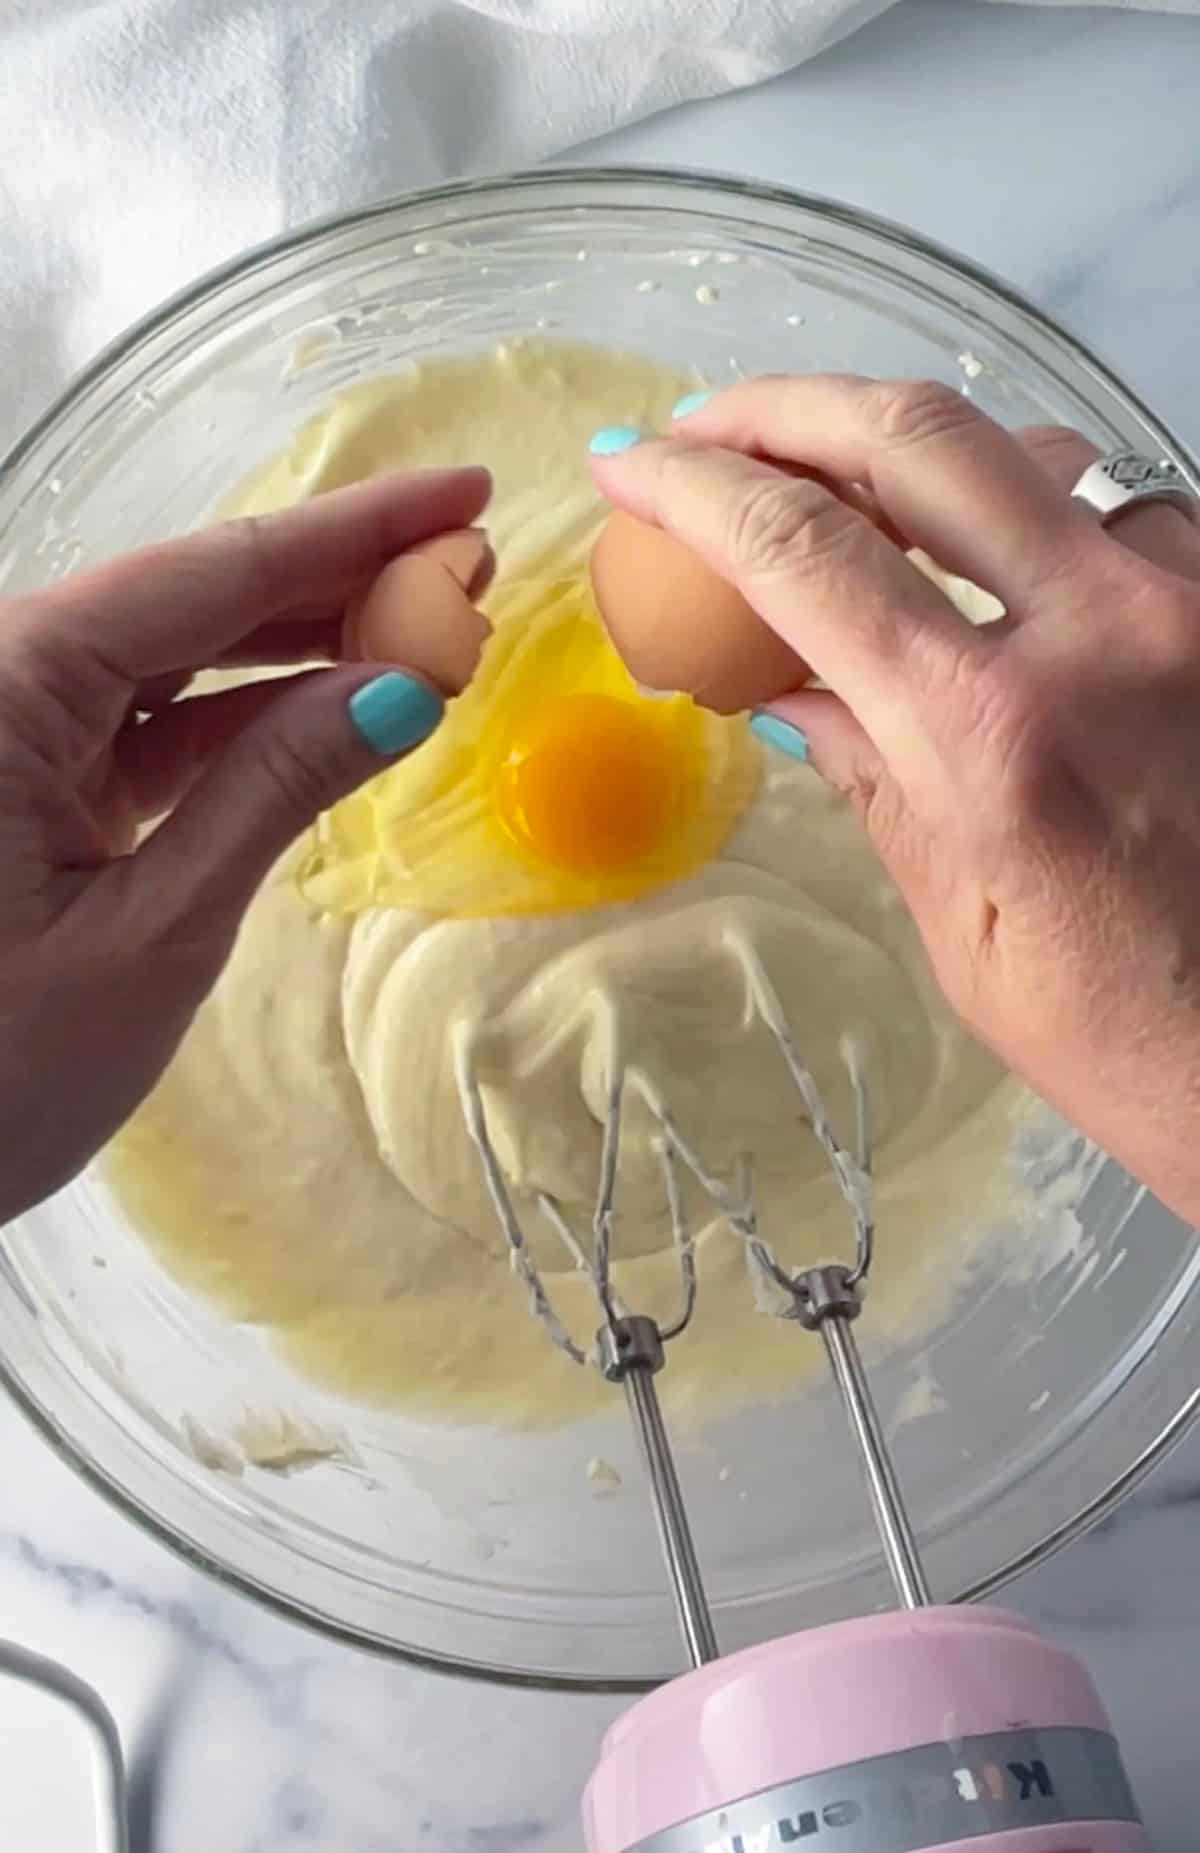 Cracking egg into cheesecake batter.